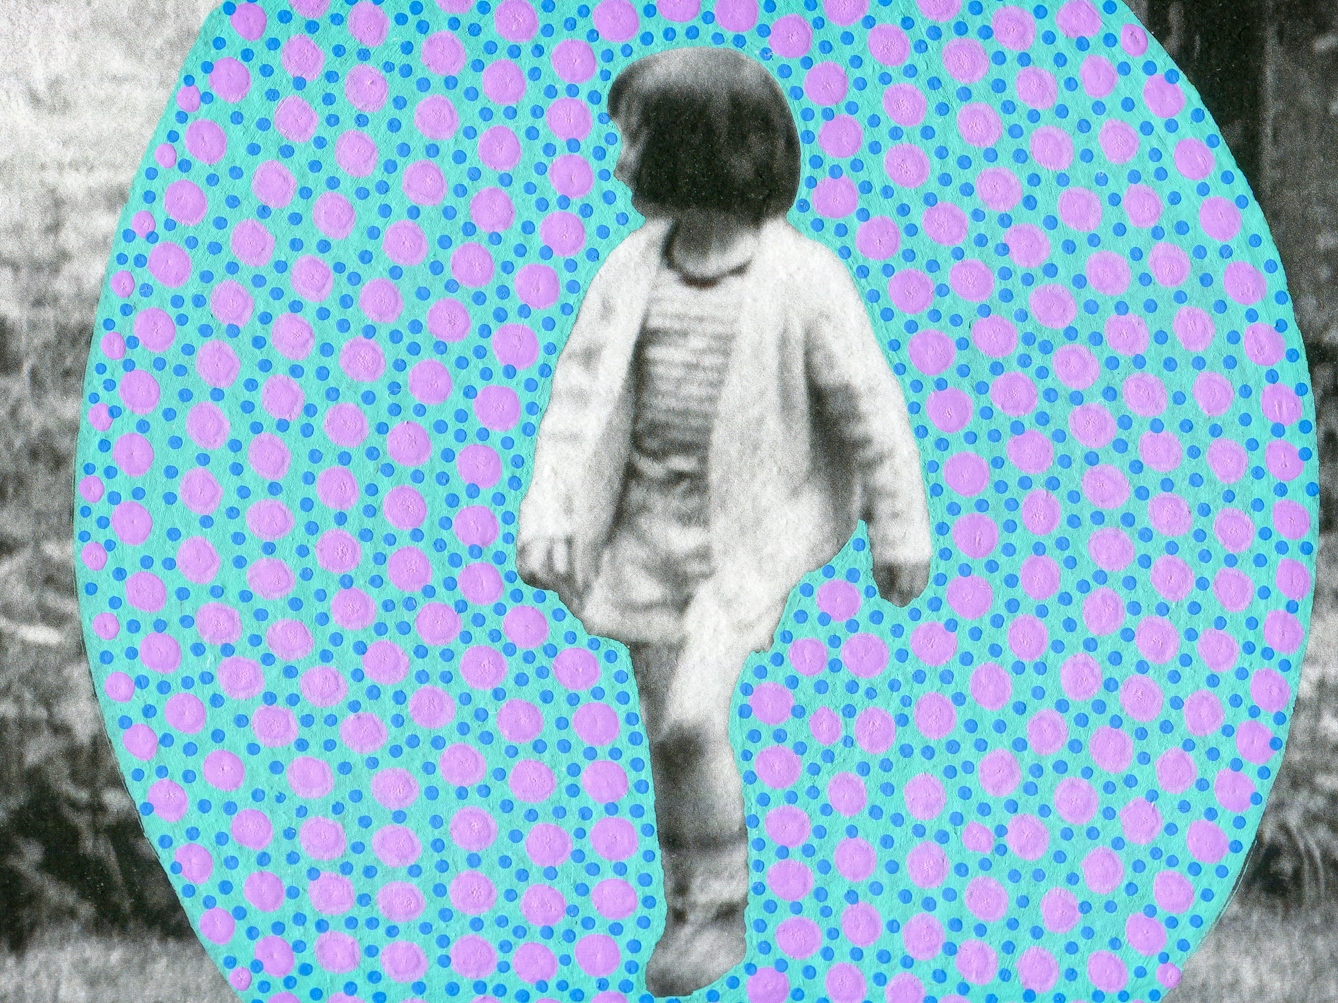 Artwork created by painting over the surface of a black and white photographic print with colourful paint. The artwork shows the original scene of a young girl walking towards the camera with her head turned to the left and her hair obscuring the side of her face. The girl is pictured in front of part of a rural cottage. The girl is surrounded by an oval shaped painted cyan background covered in small blue and larger purple dots. The texture of the paint can be seen.